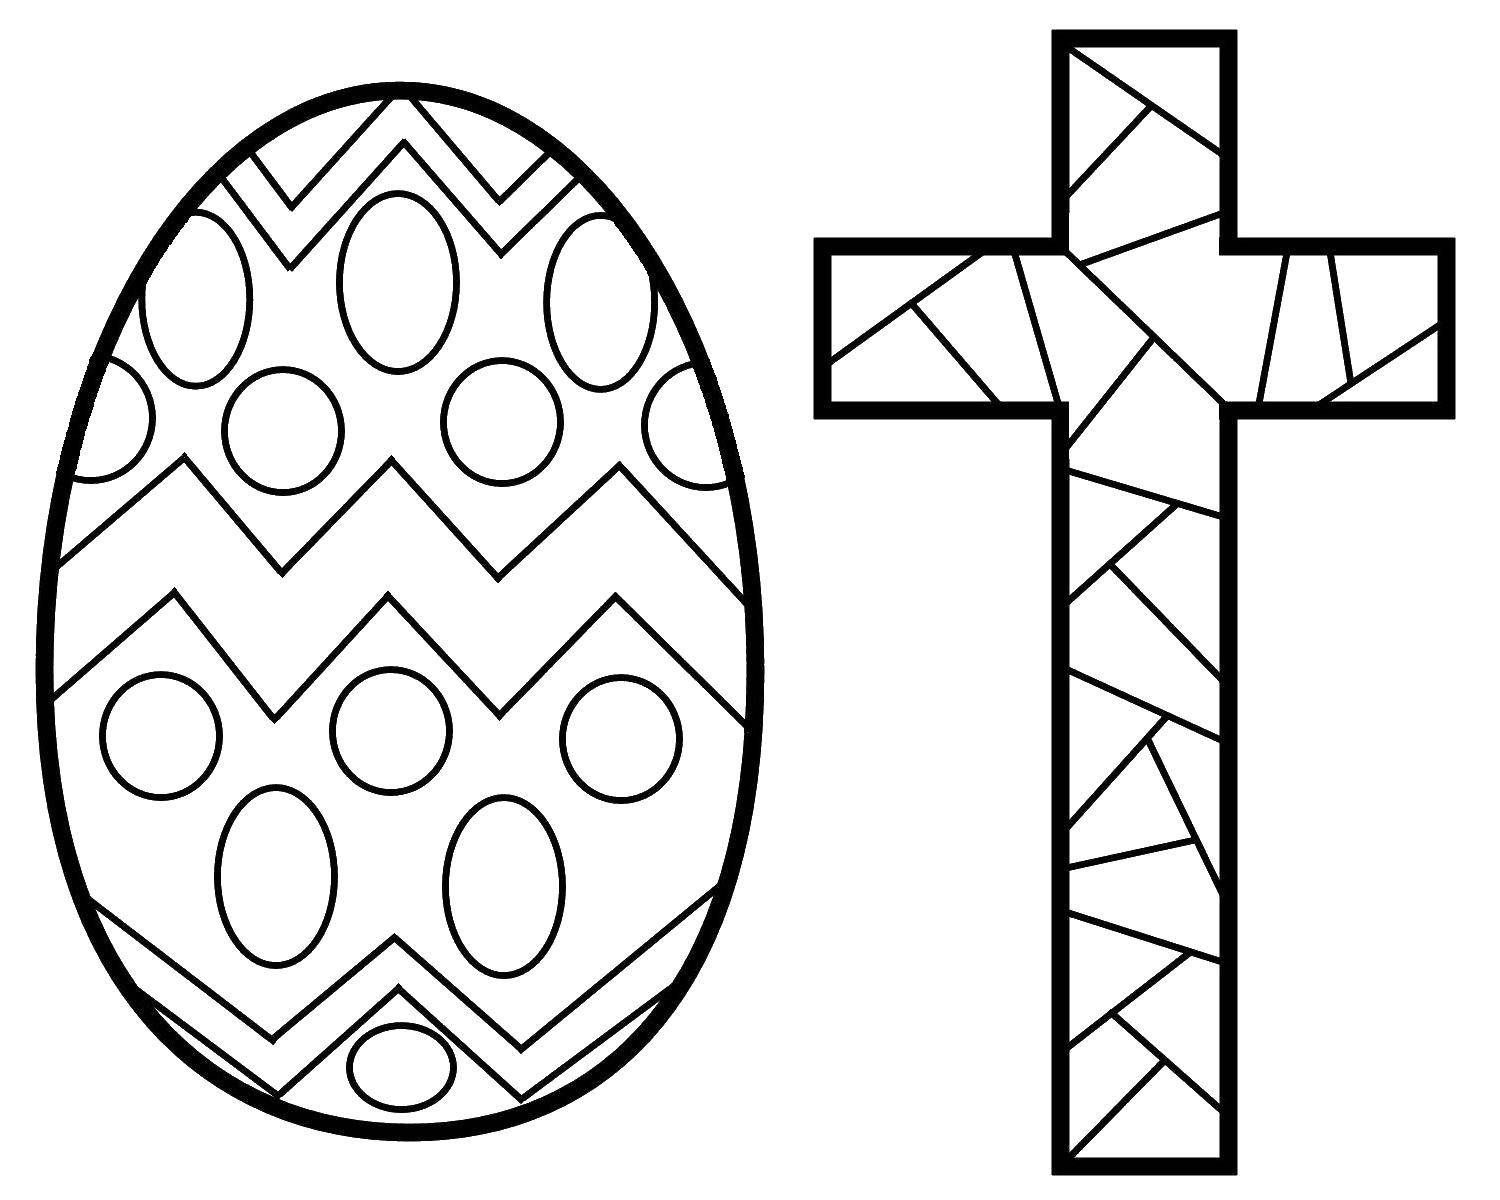 Coloring The cross and Easter egg. Category coloring pages cross. Tags:  Cross.